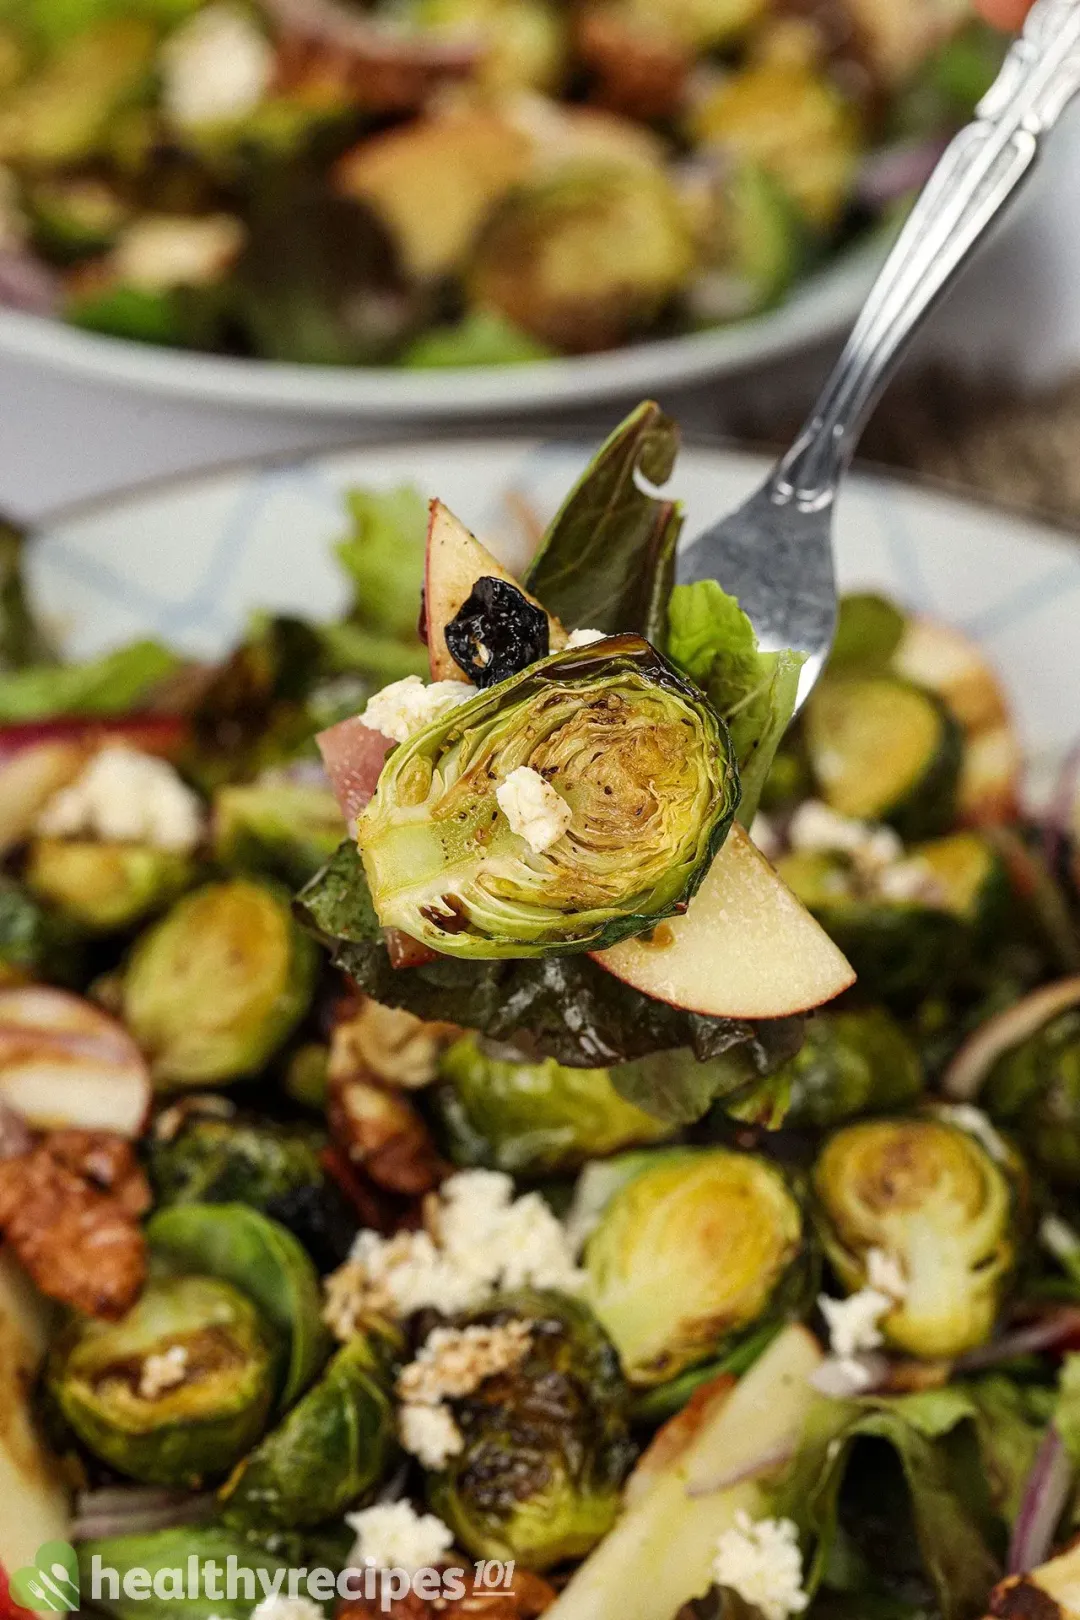 Is Grilled Brussels Sprout Salad Healthy